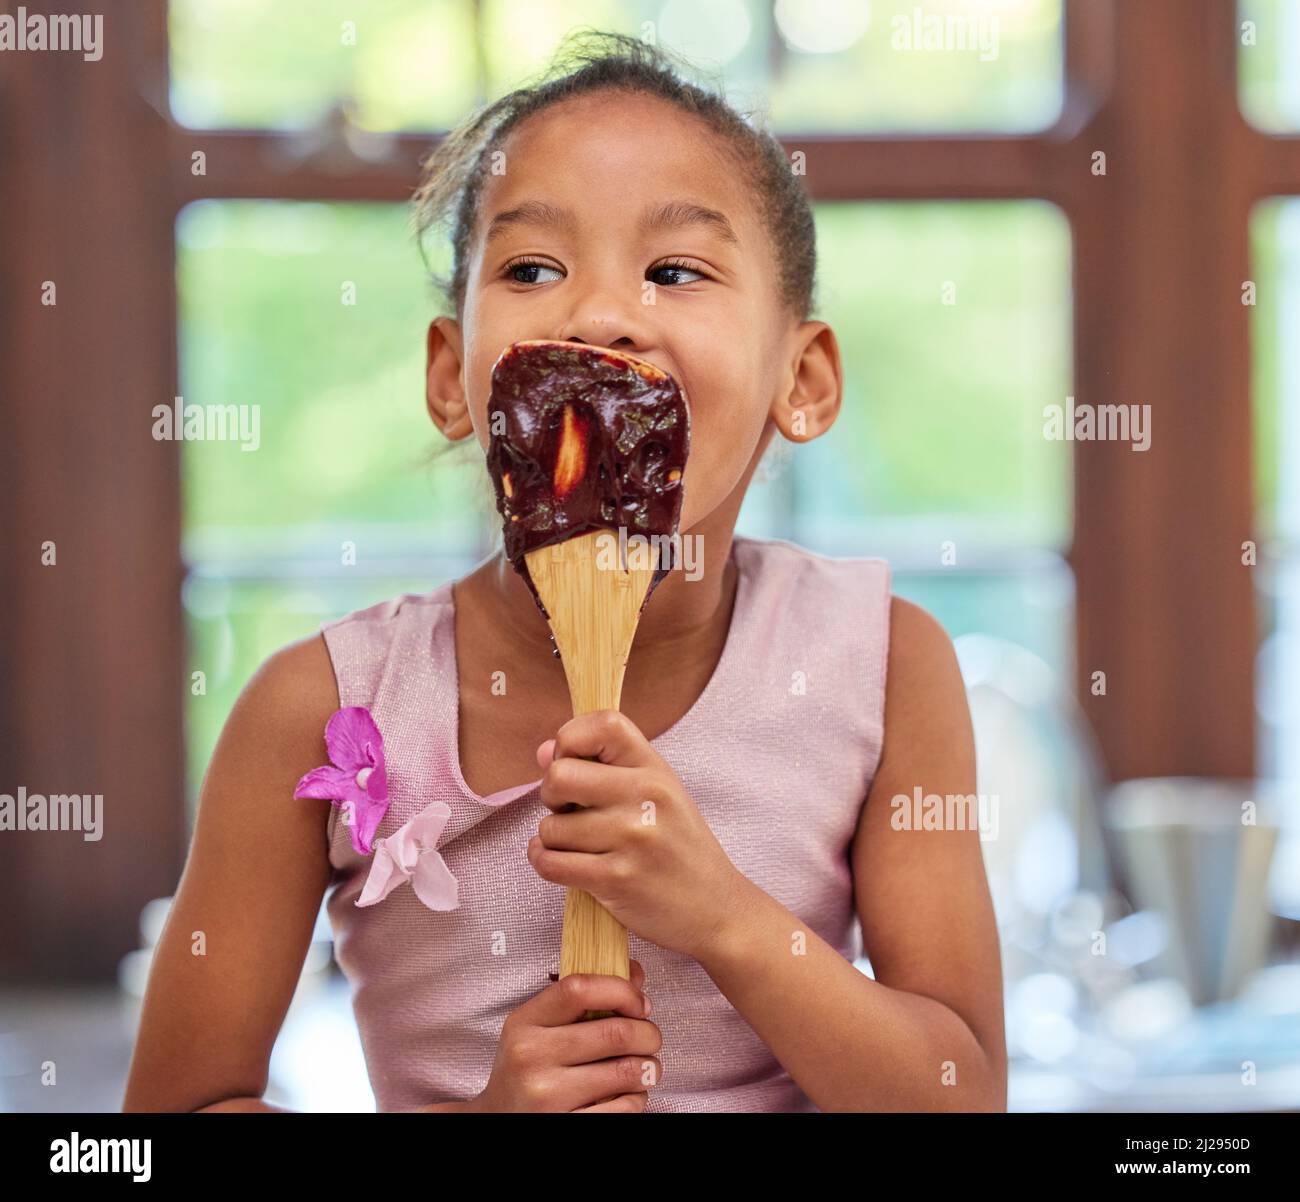 Best morning ever. Shot of an adorable little girl licking a chocolate batter covered spoon while baking in the kitchen at home. Stock Photo